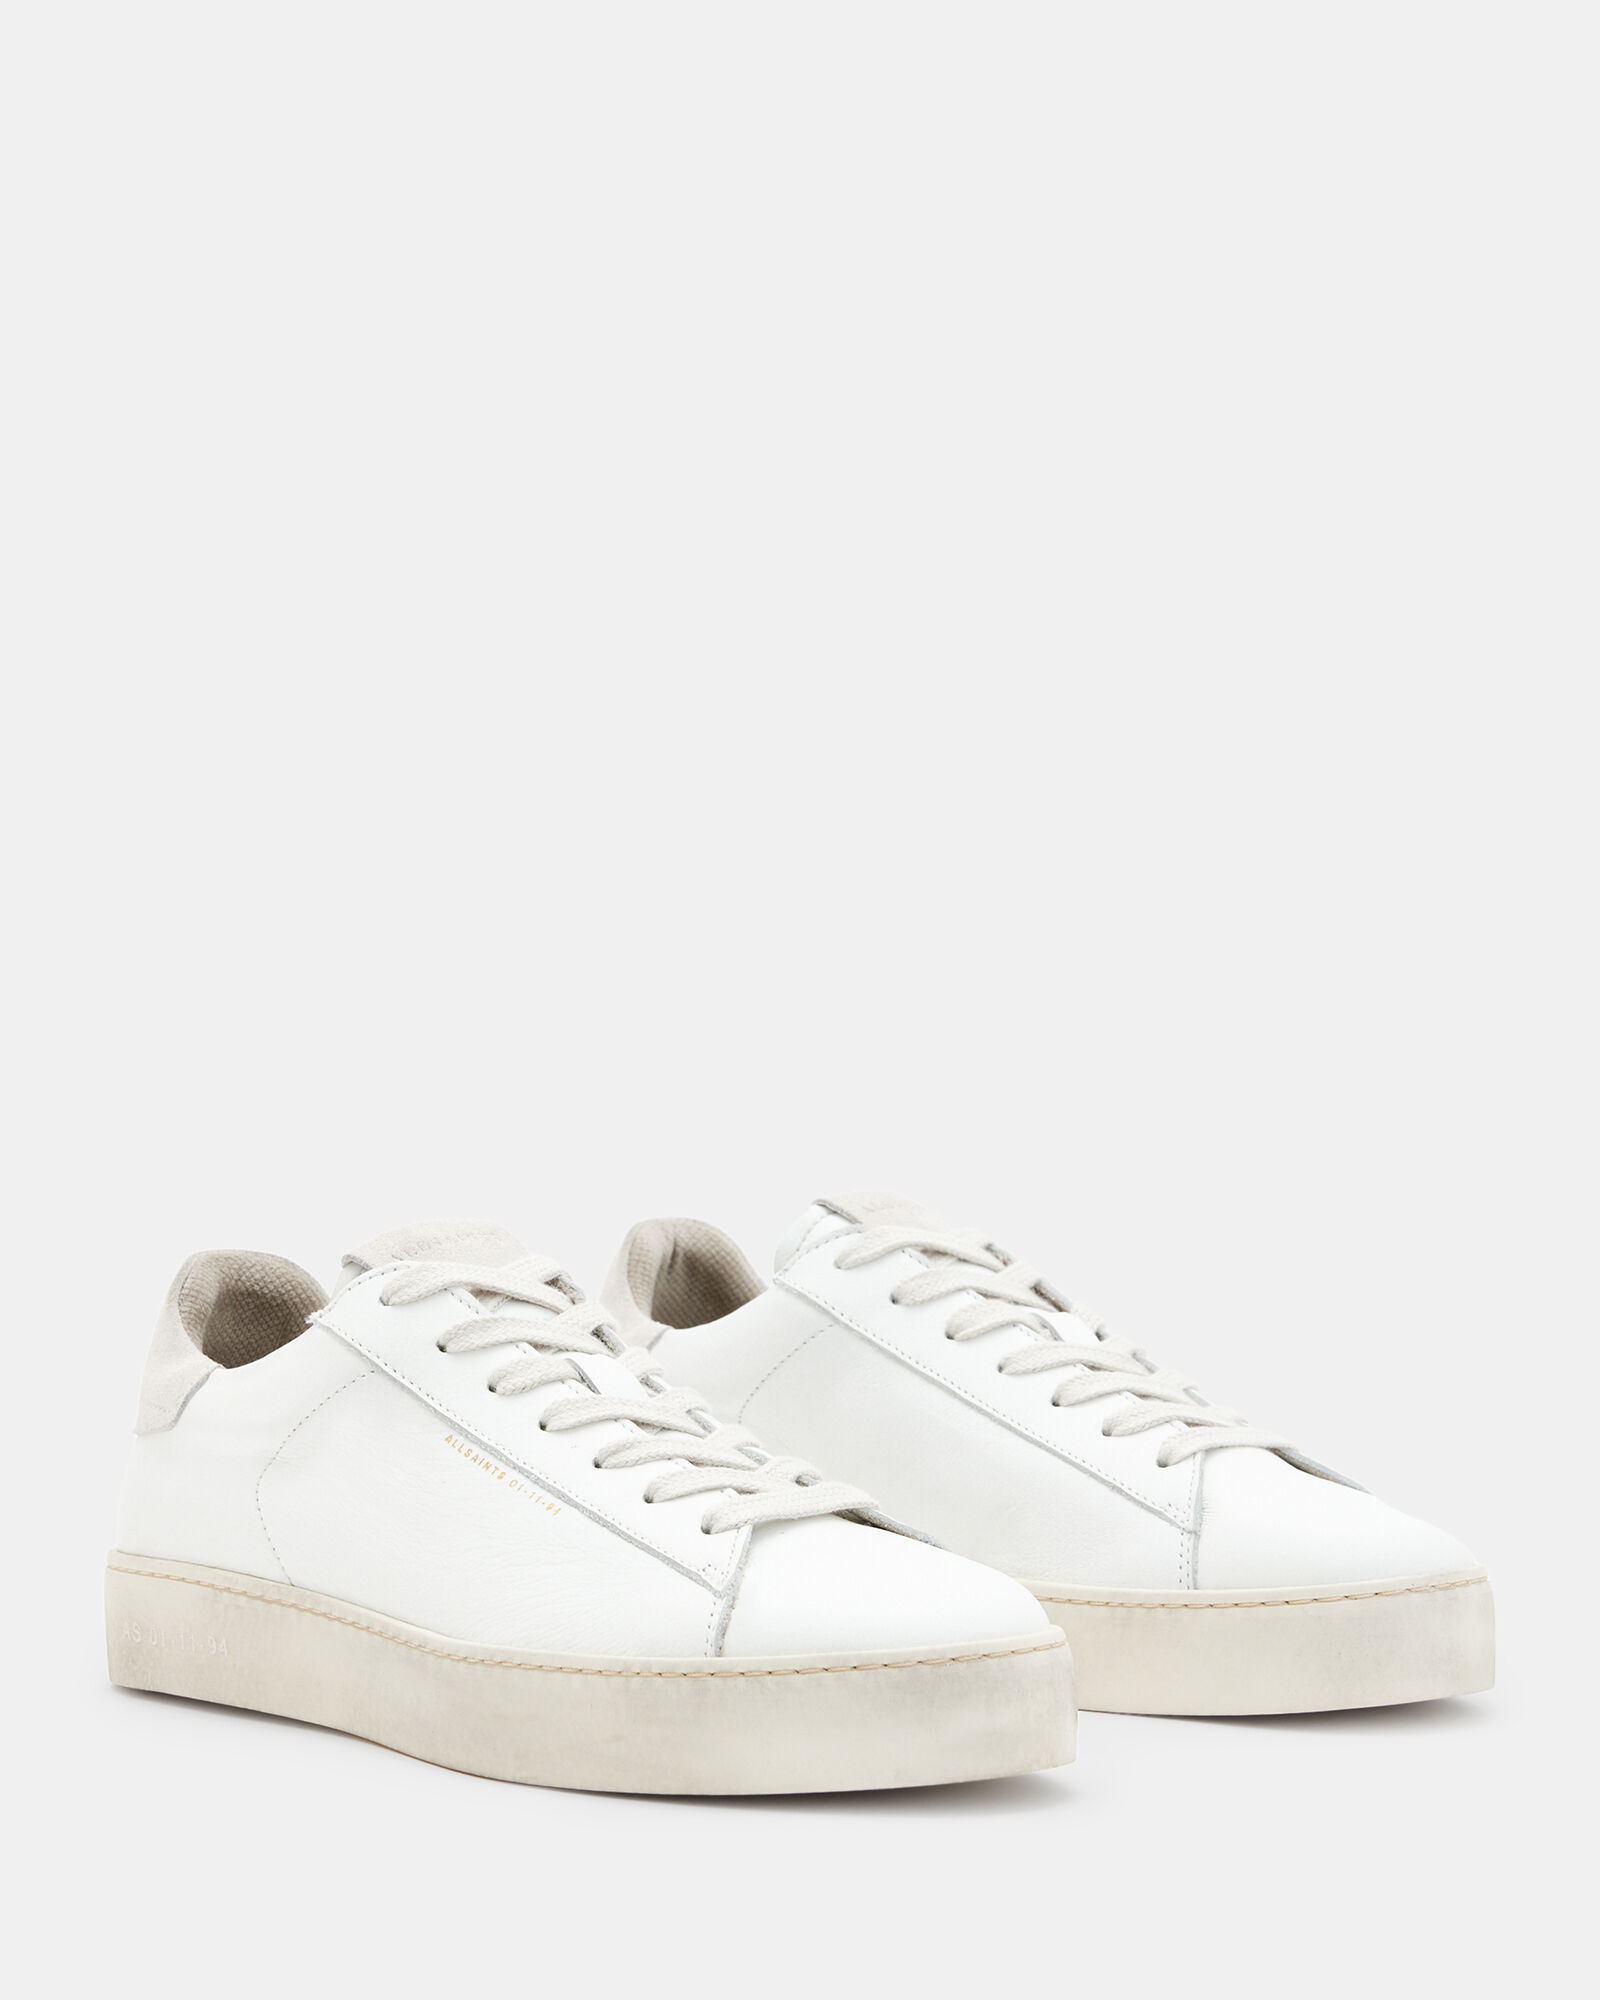 Shana Low Top Leather Sneakers